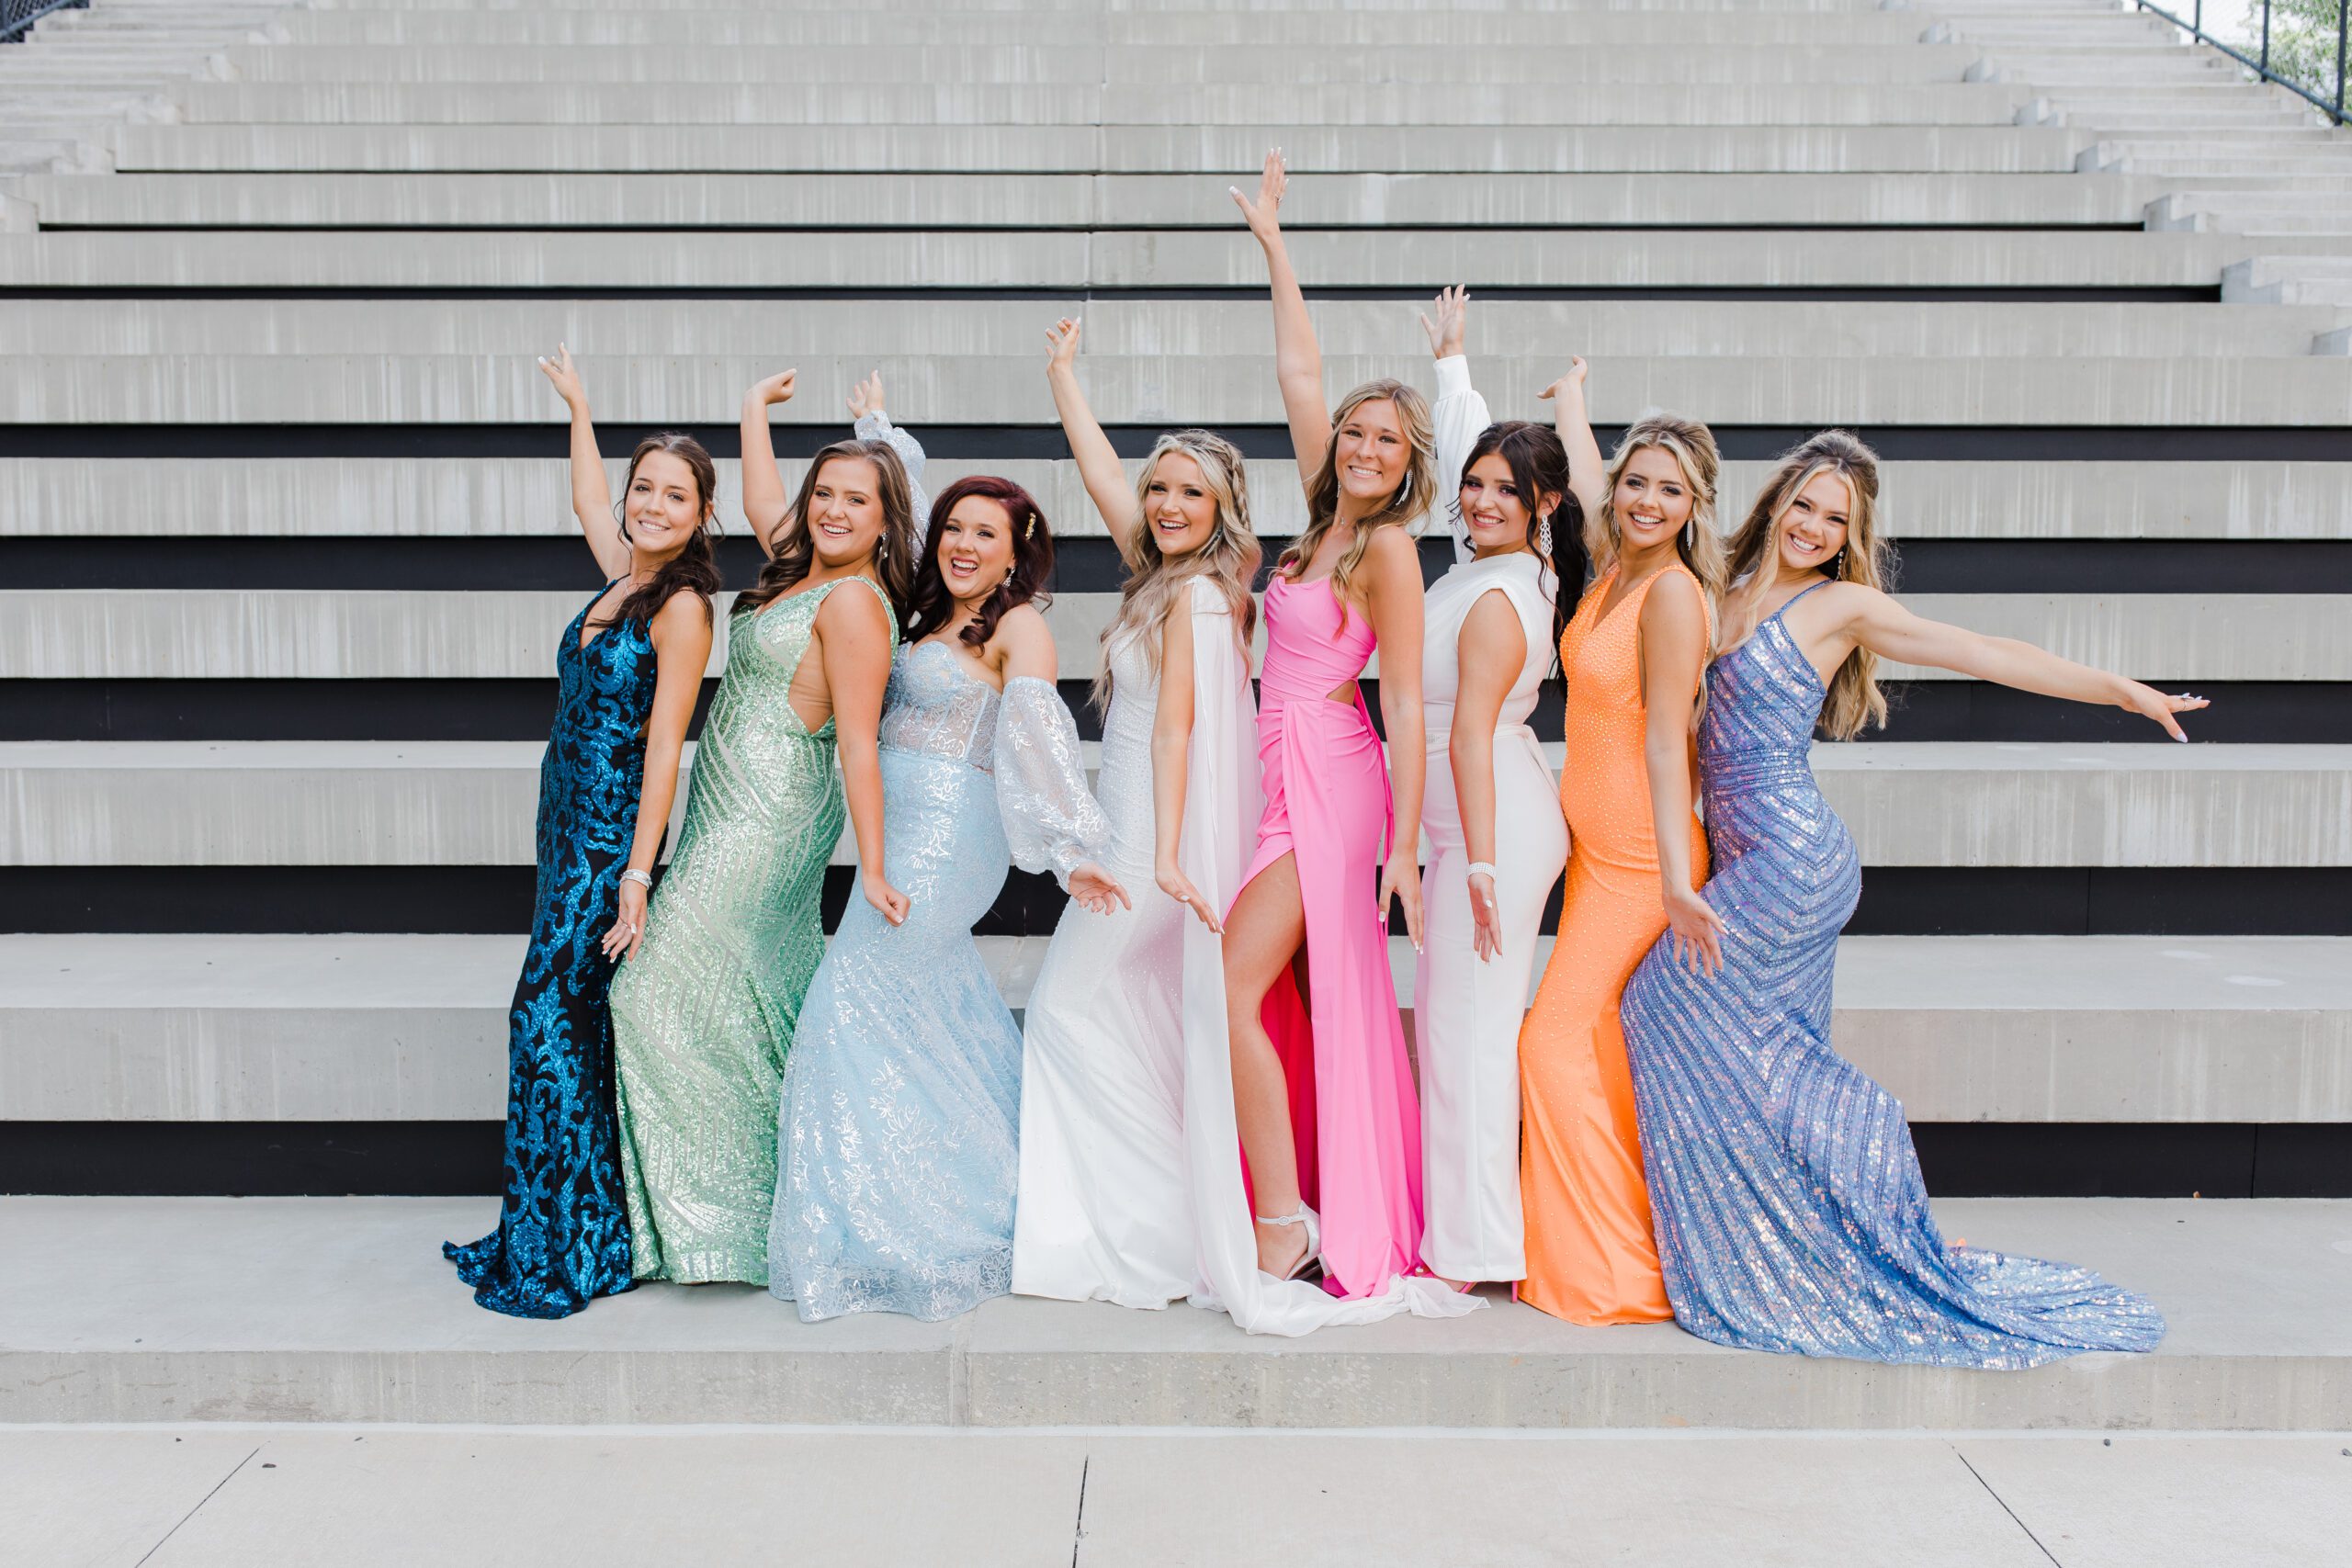 Augusta photographers photographs best friends in their prom dresses standing together in front of bleachers with their arms in the air